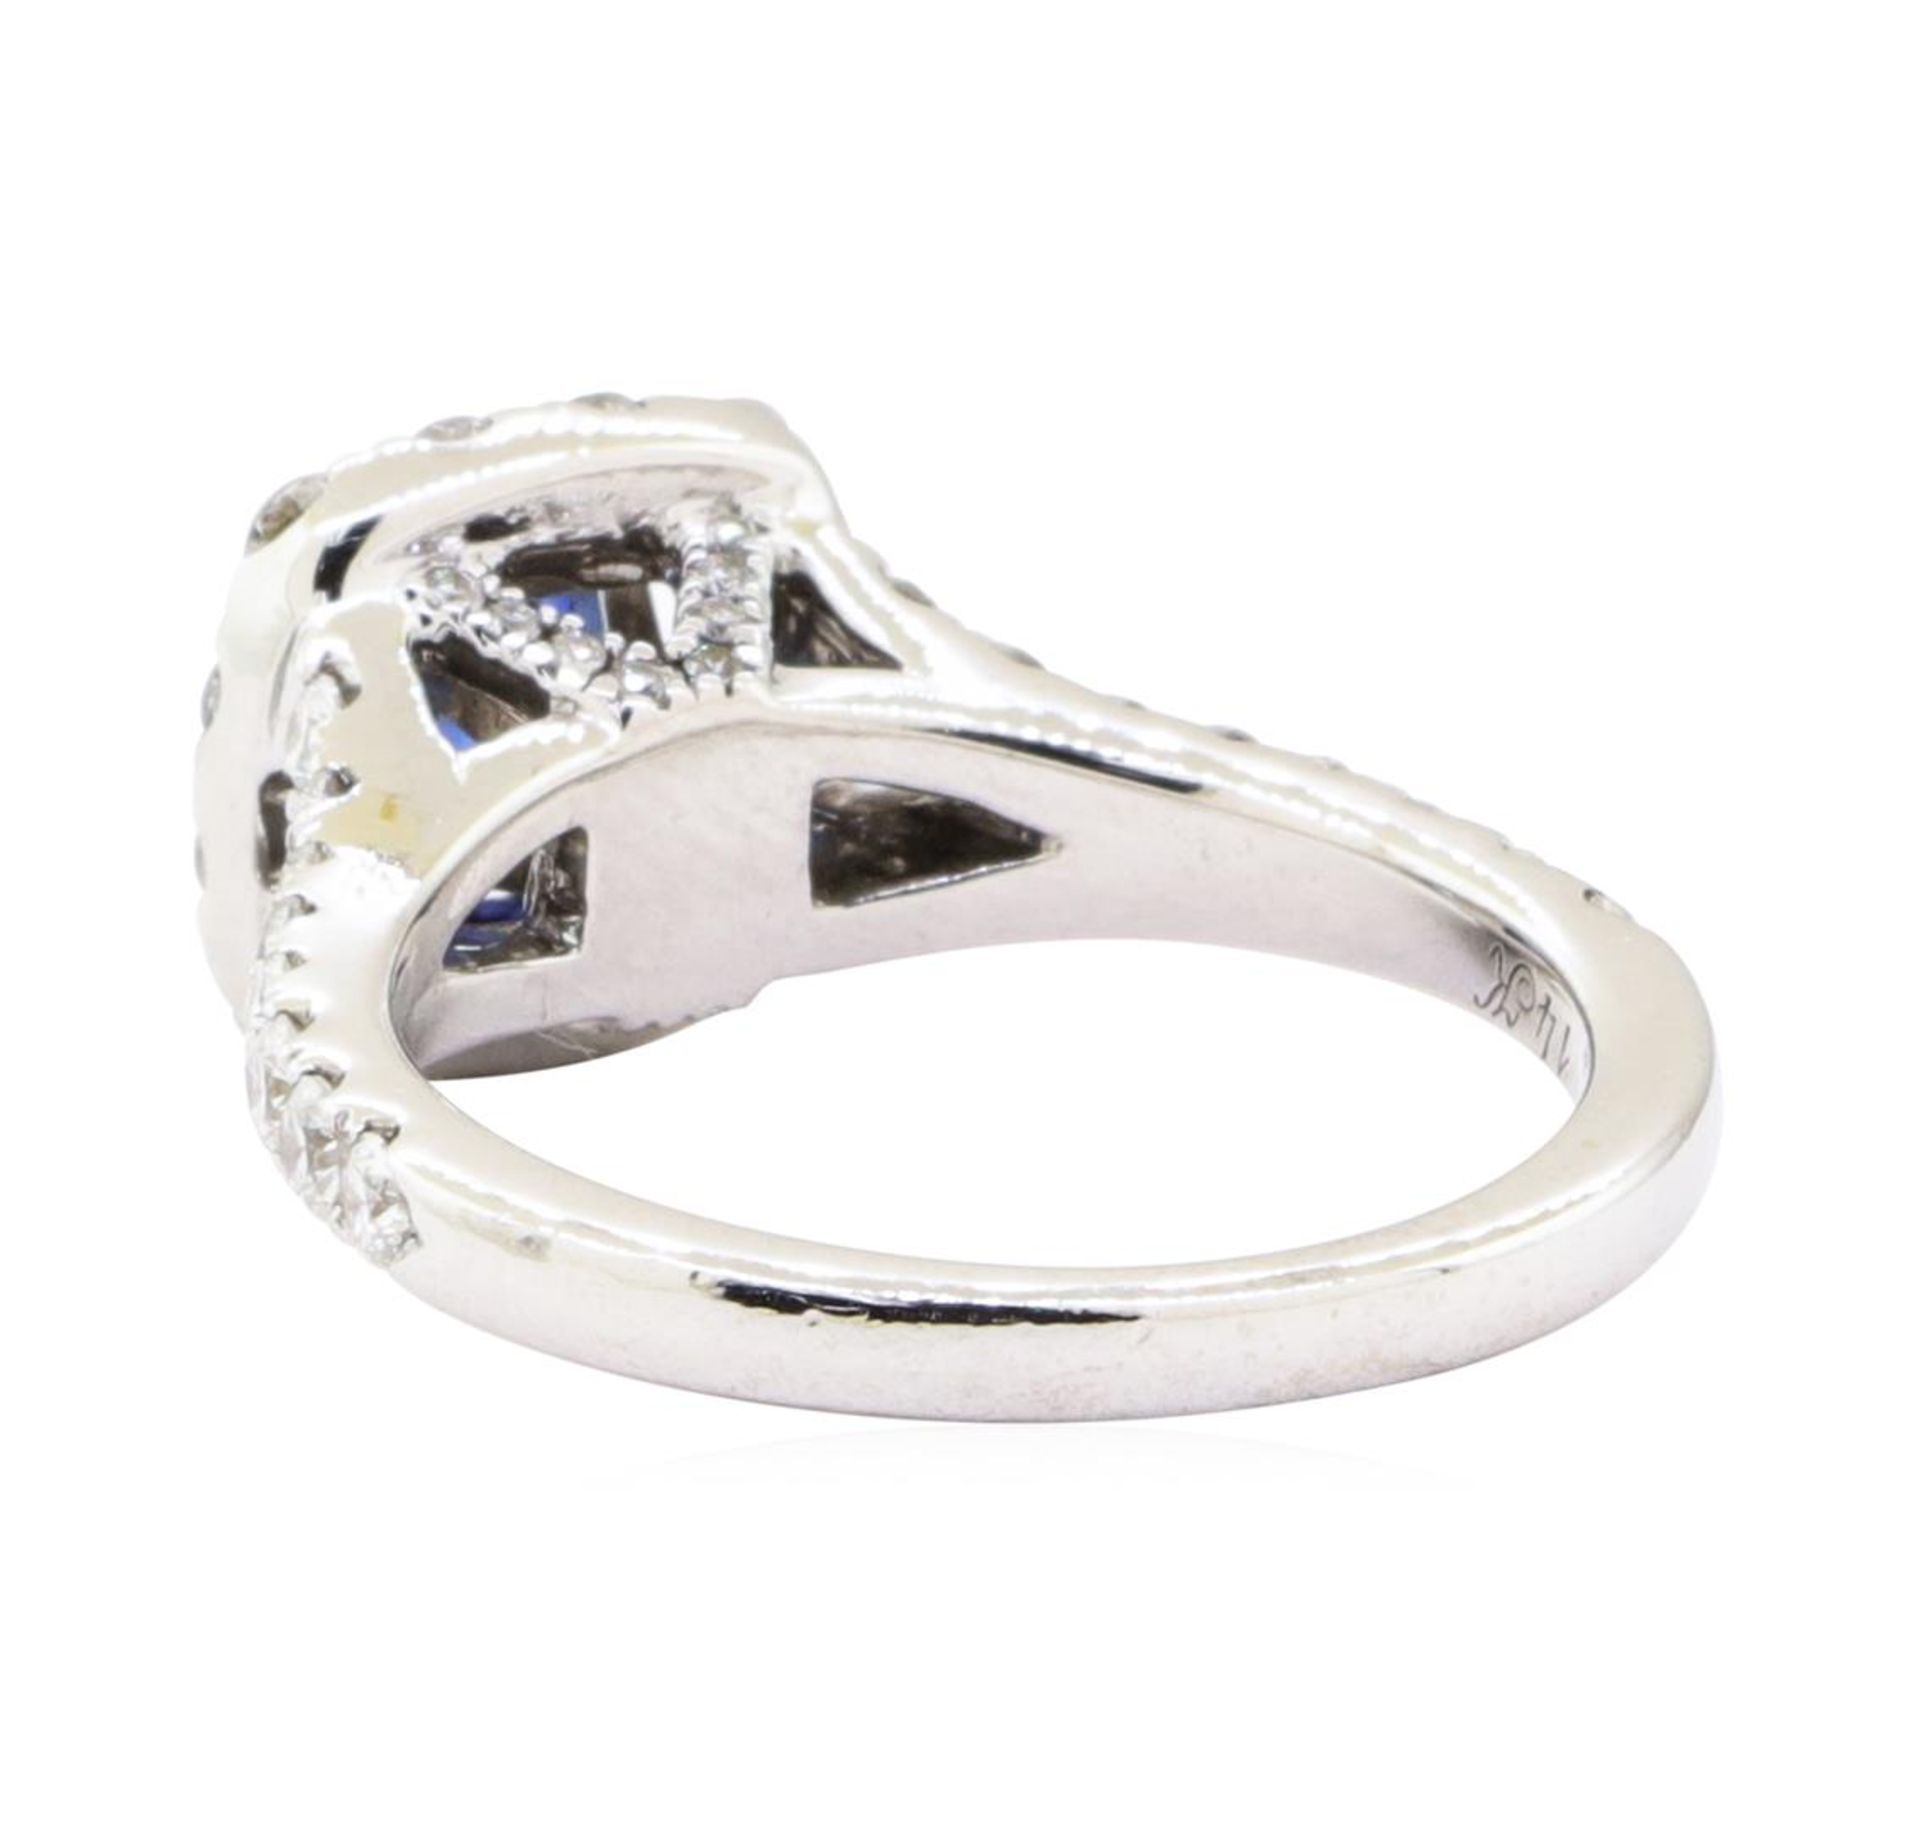 2.20 ctw Sapphire And Diamond Ring - 14KT White Gold - Image 3 of 6